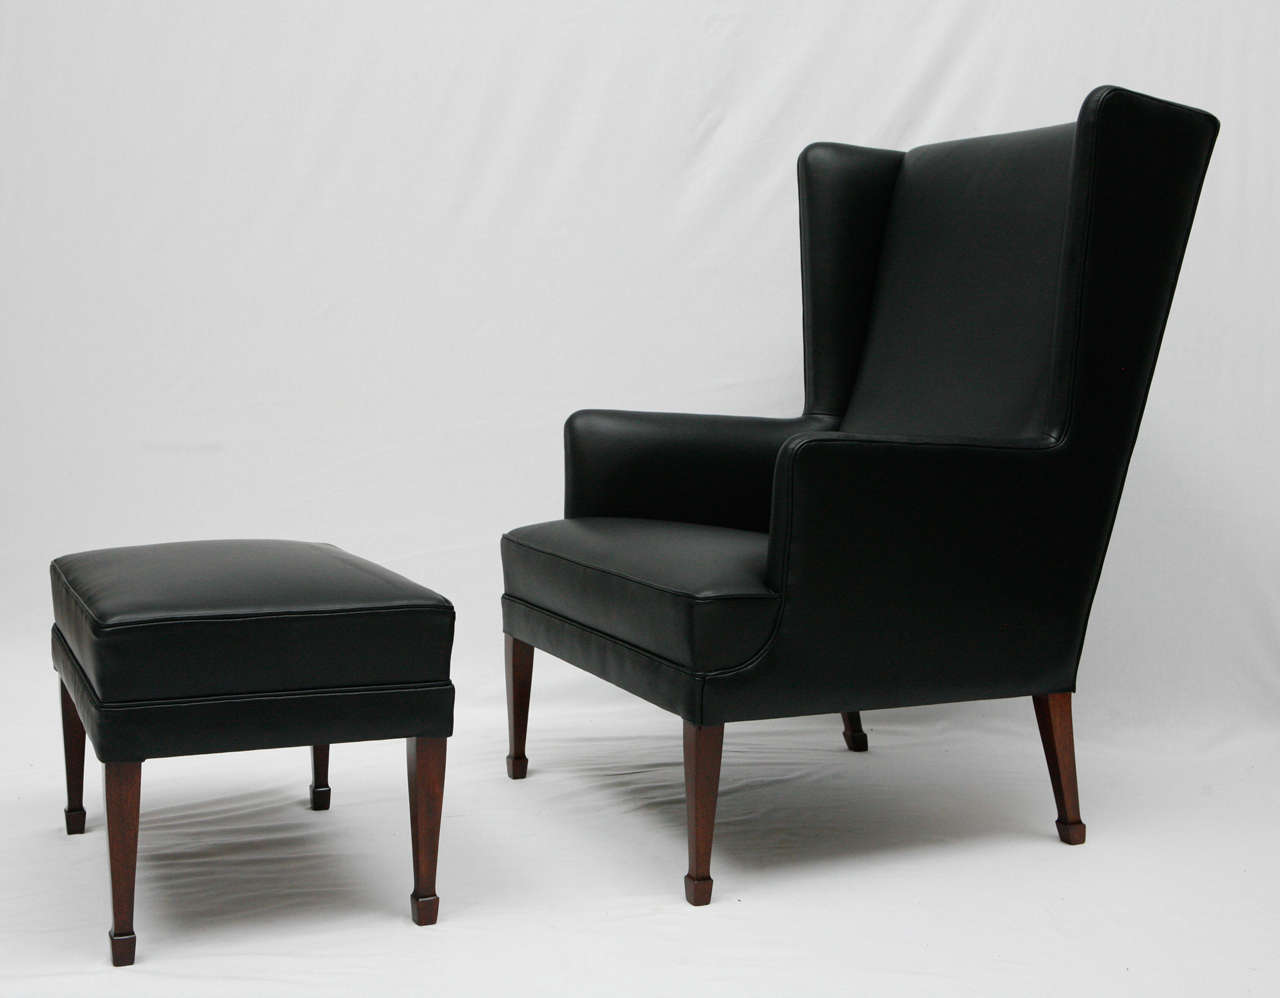 Frits Henningsen wingback chair reupholstered in new black leather.